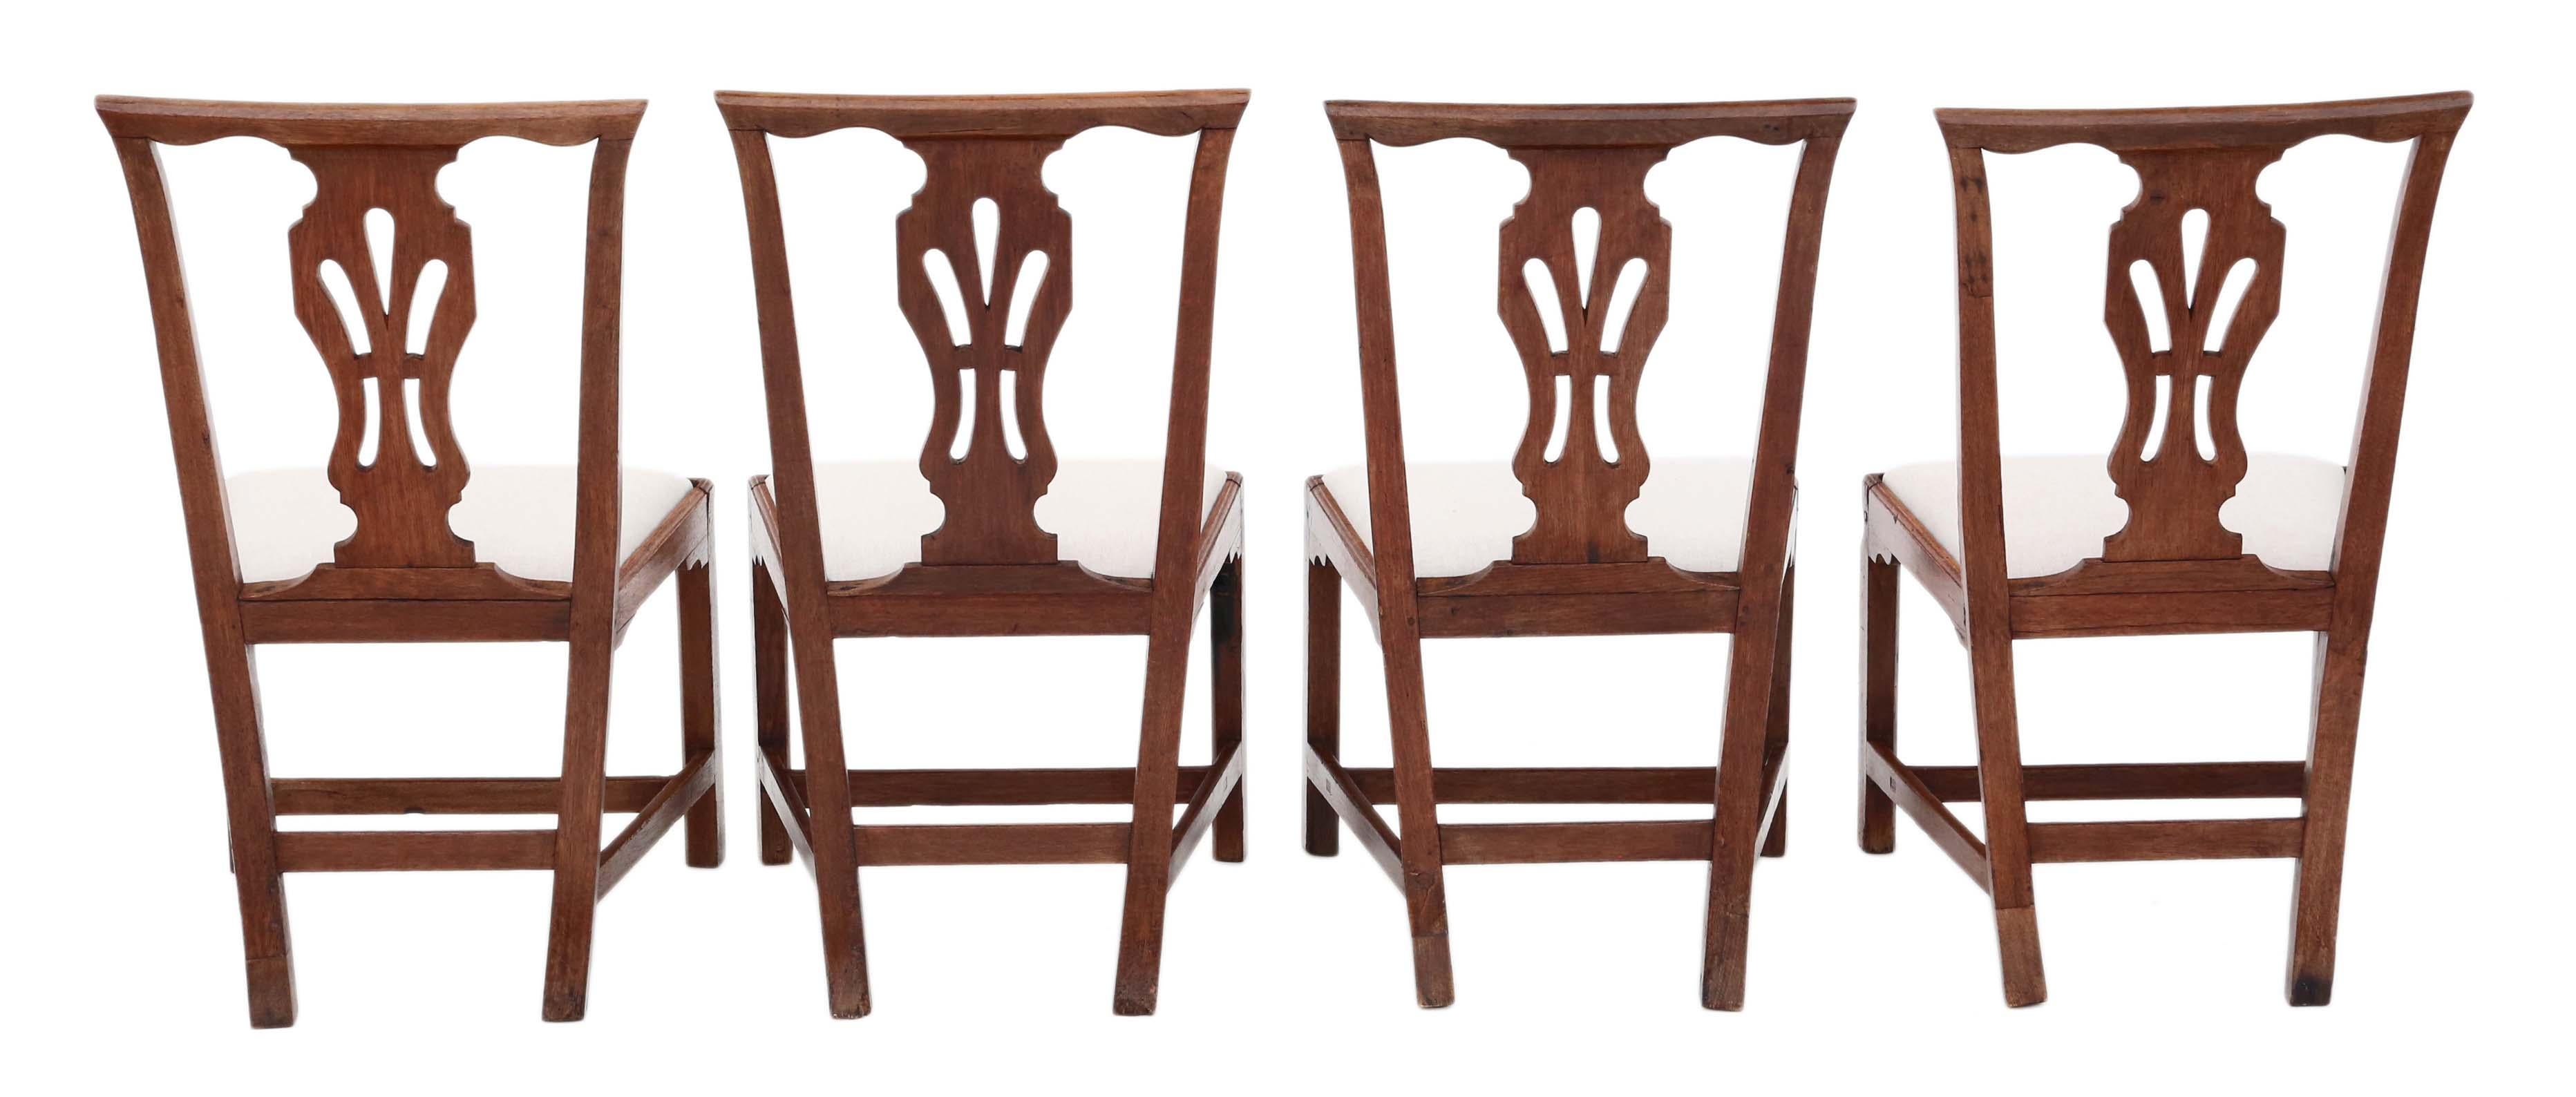 Antique quality set of 4 Georgian oak dining chairs C1790.

No loose joints.

New professional upholstery.

Overall maximum dimensions: 53cmW x 47cmD x 93cmH (46cmH seat when sat on)

Good very antique condition with minor historic knocks,